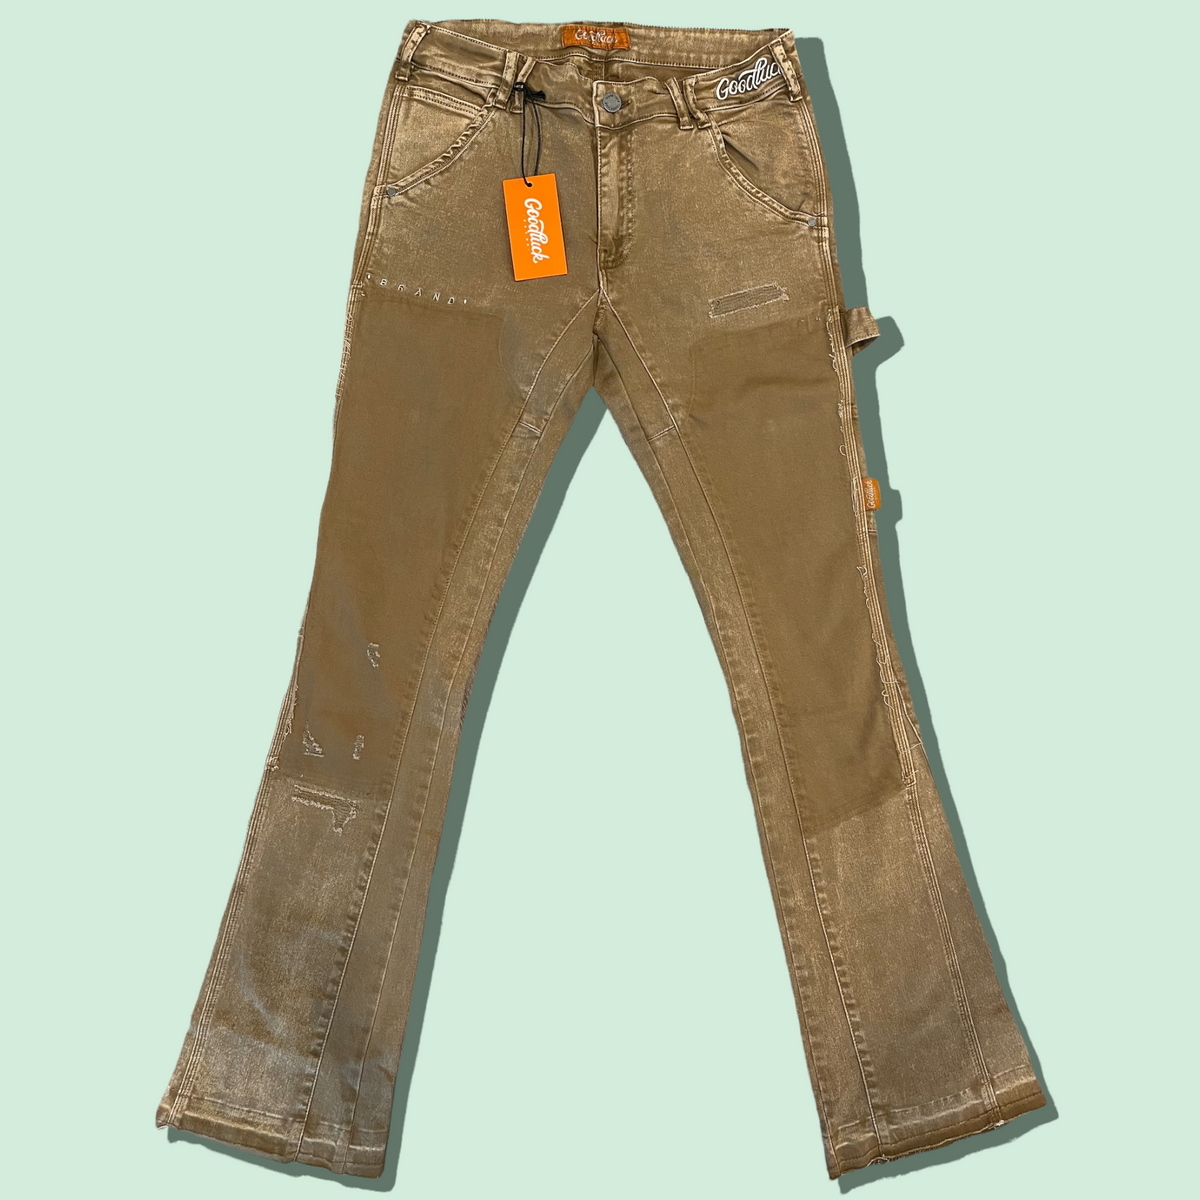 Steel Grey Flare “Work Pants” – The Good Luck Brand